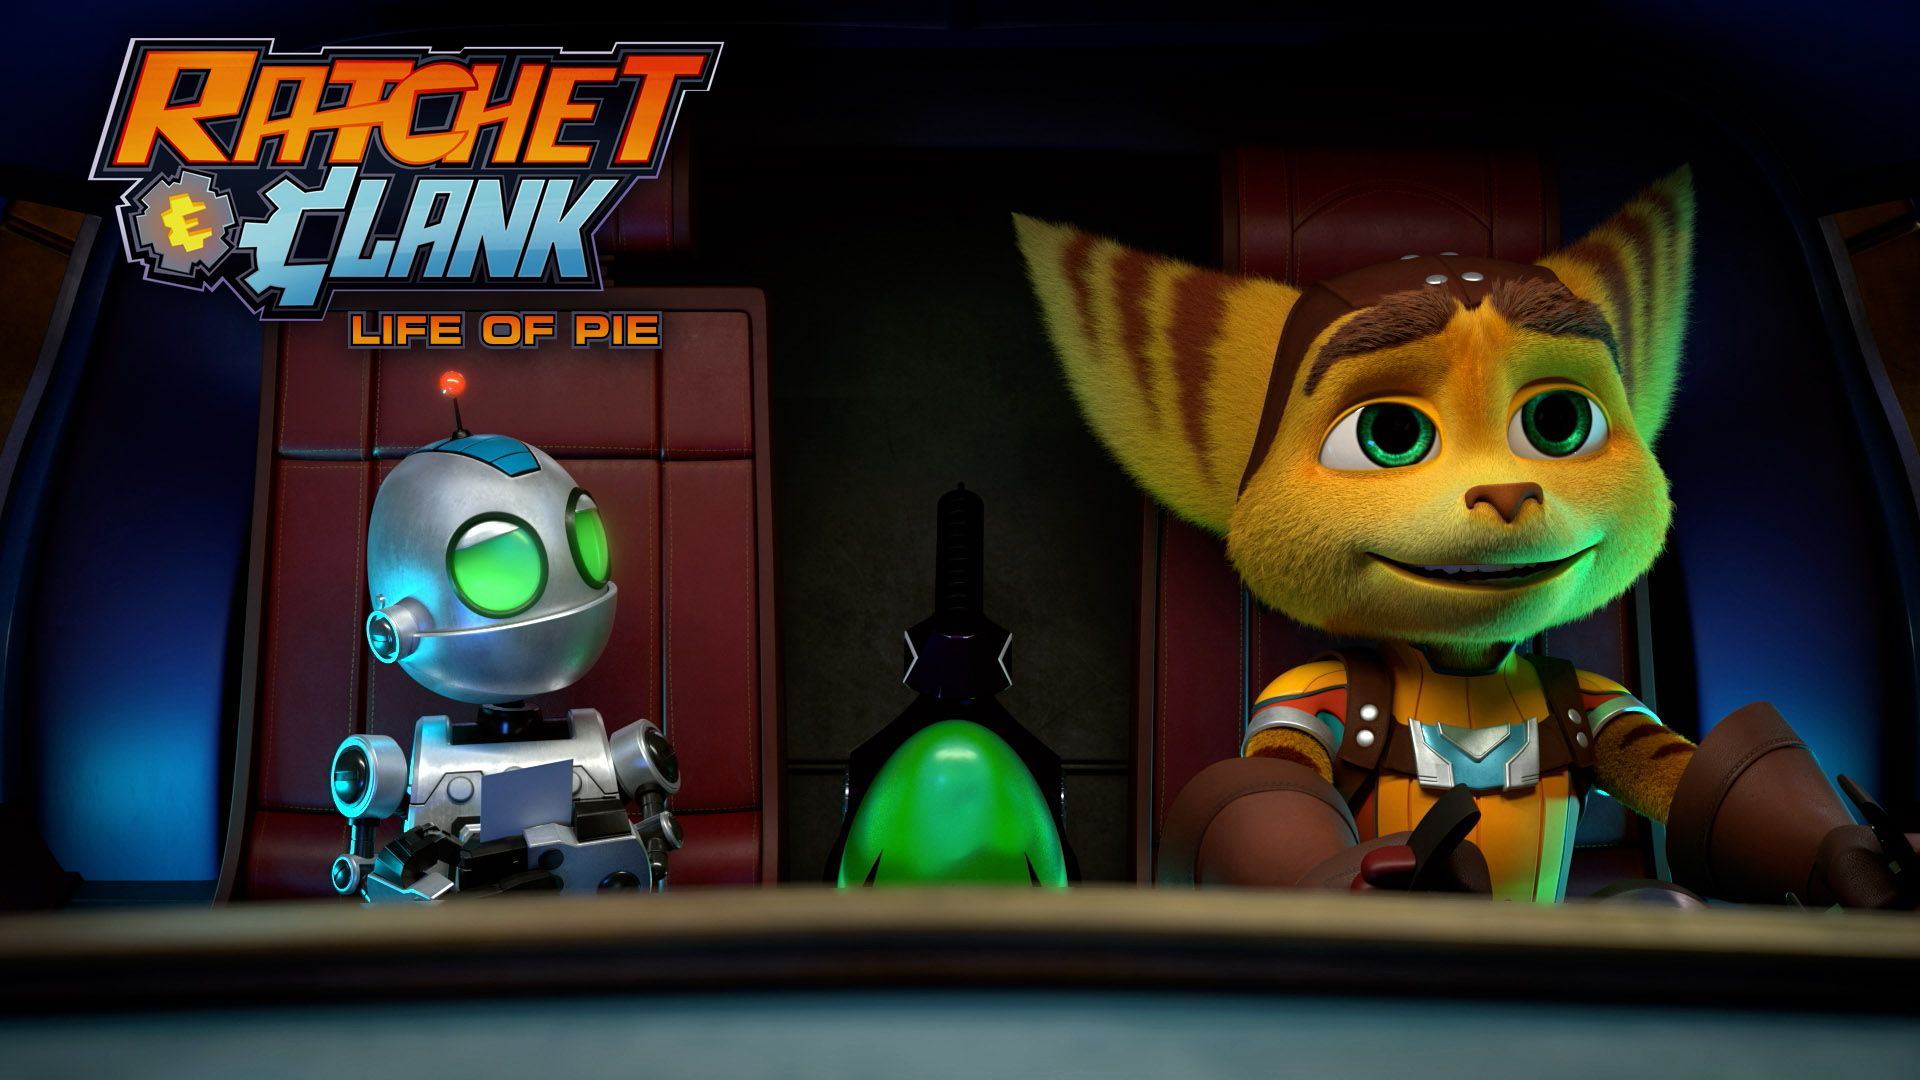 A short animated movie titled Ratchet & Clank: The Life of Pie is made for Newsblock